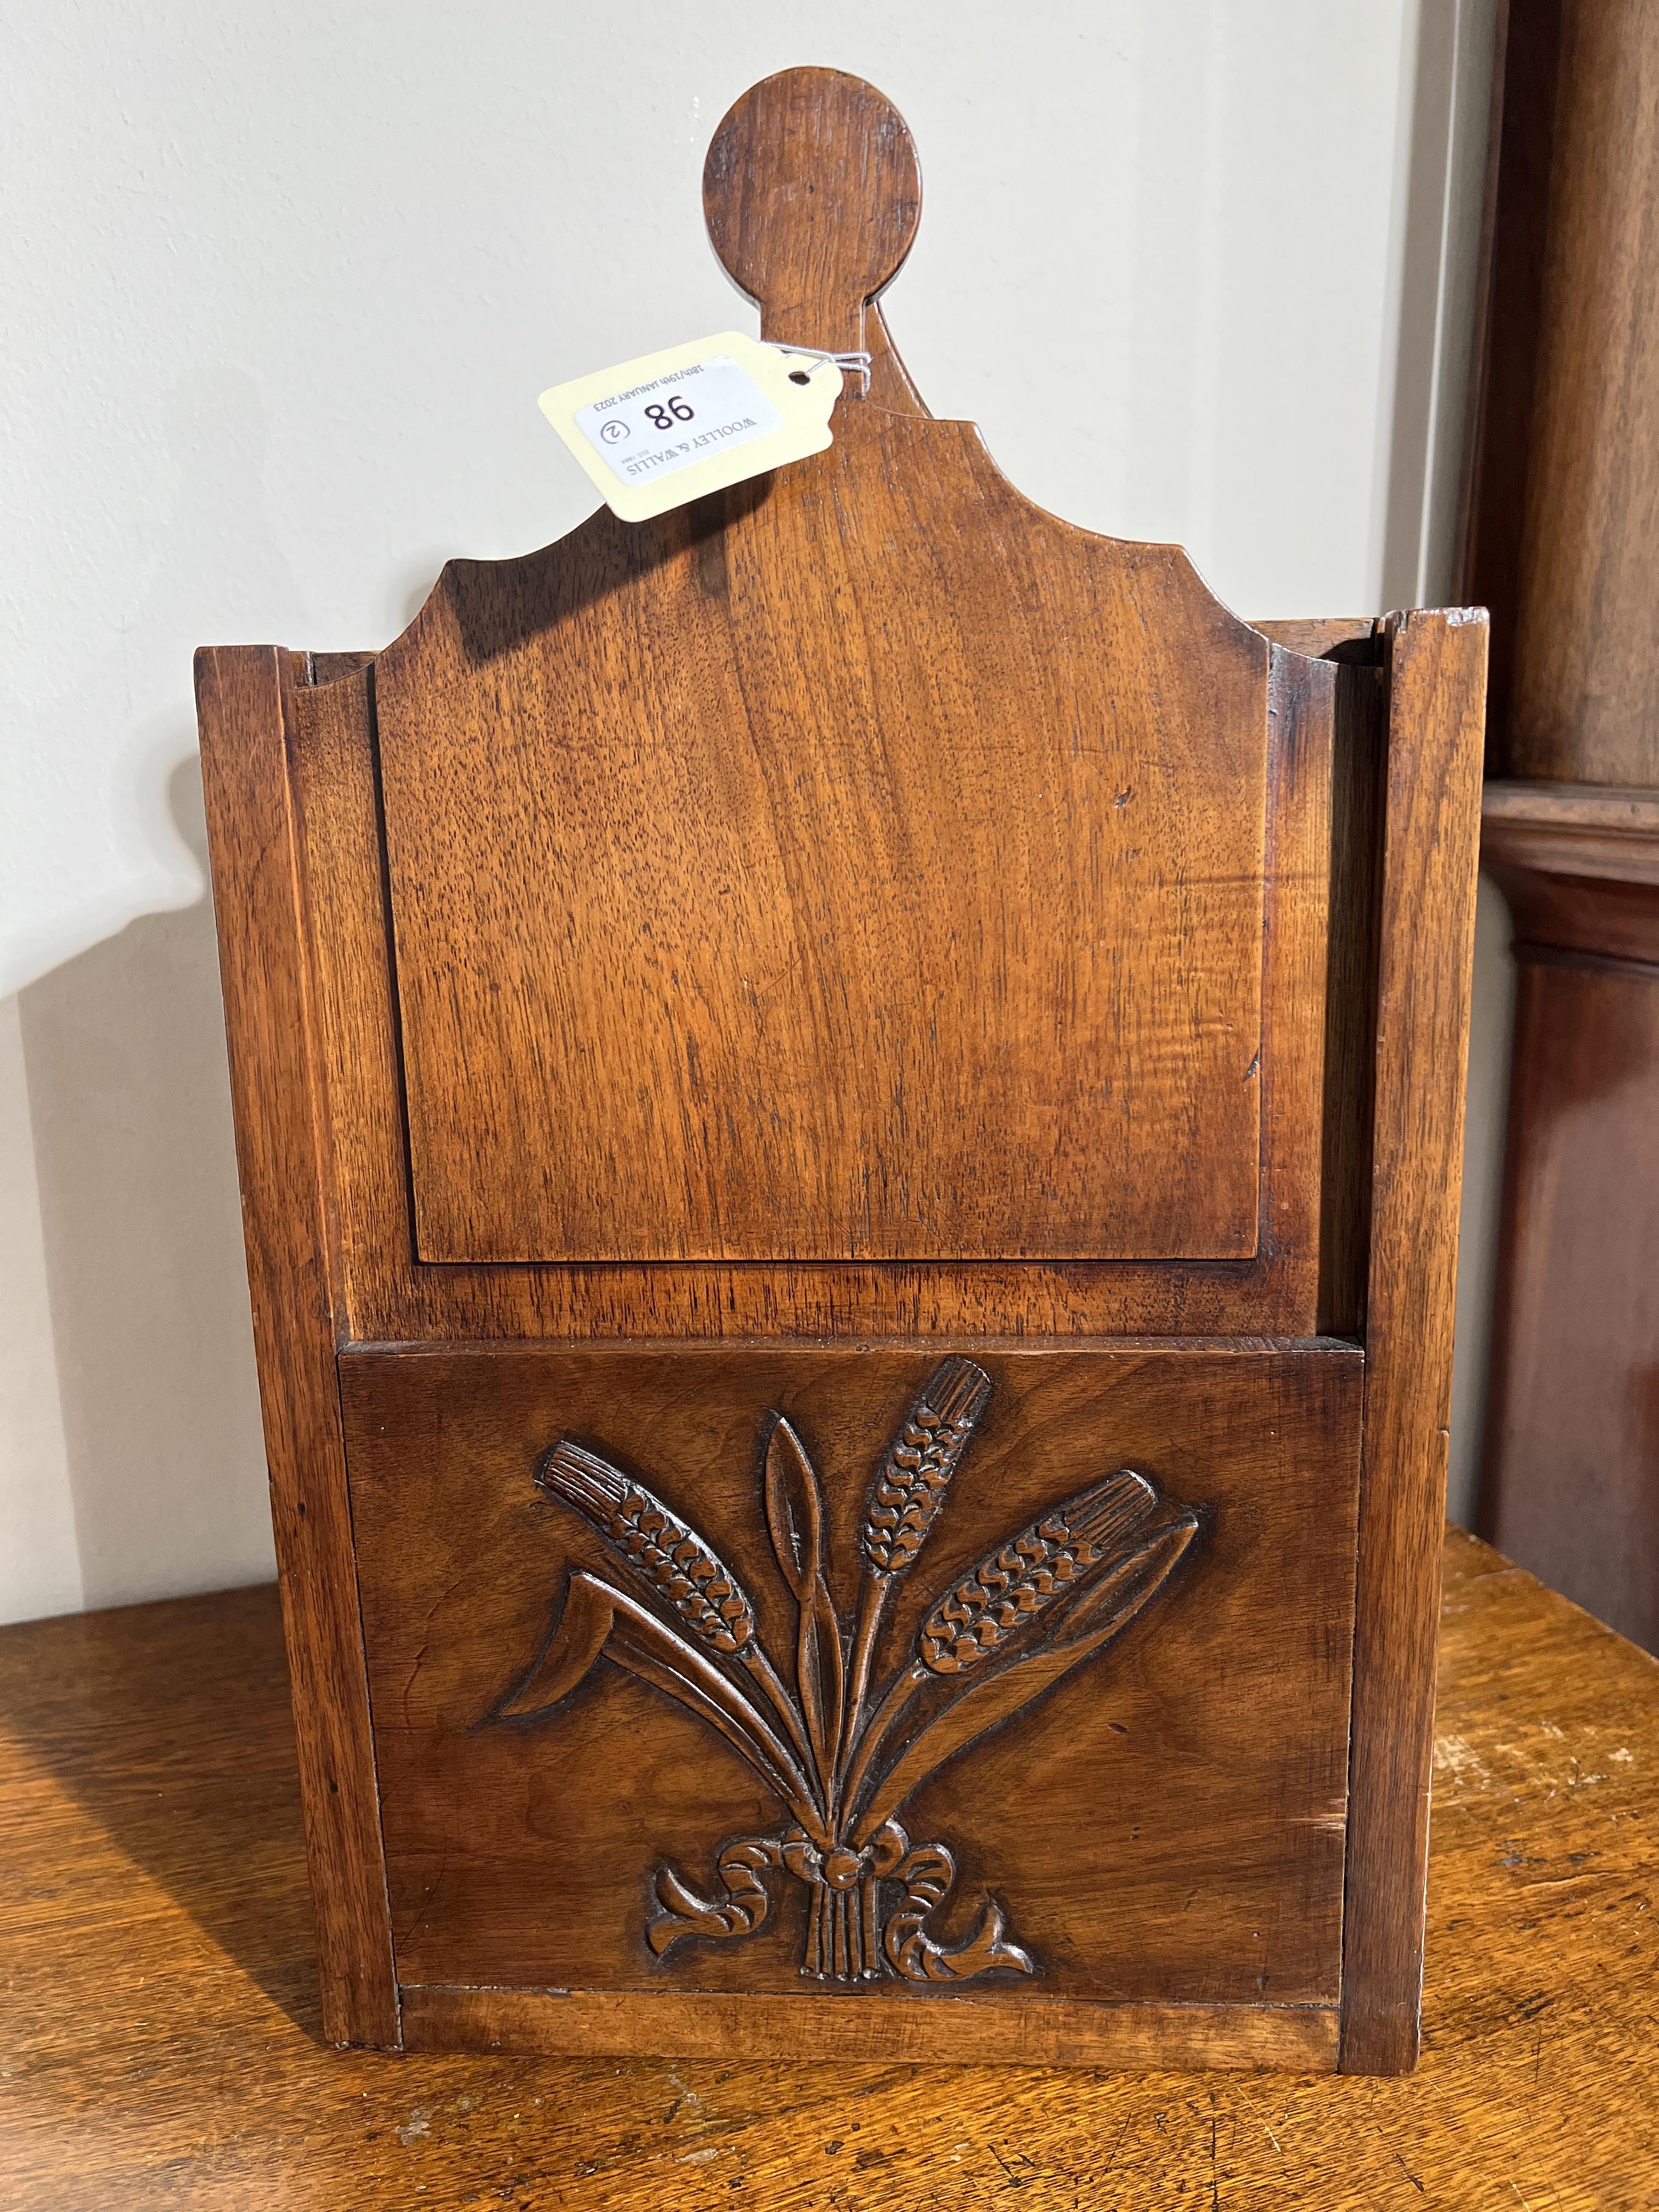 A FRENCH PROVINCIAL WALNUT CANDLE BOX LATE 18TH / EARLY 19TH CENTURYwith a sliding cover and - Image 10 of 18